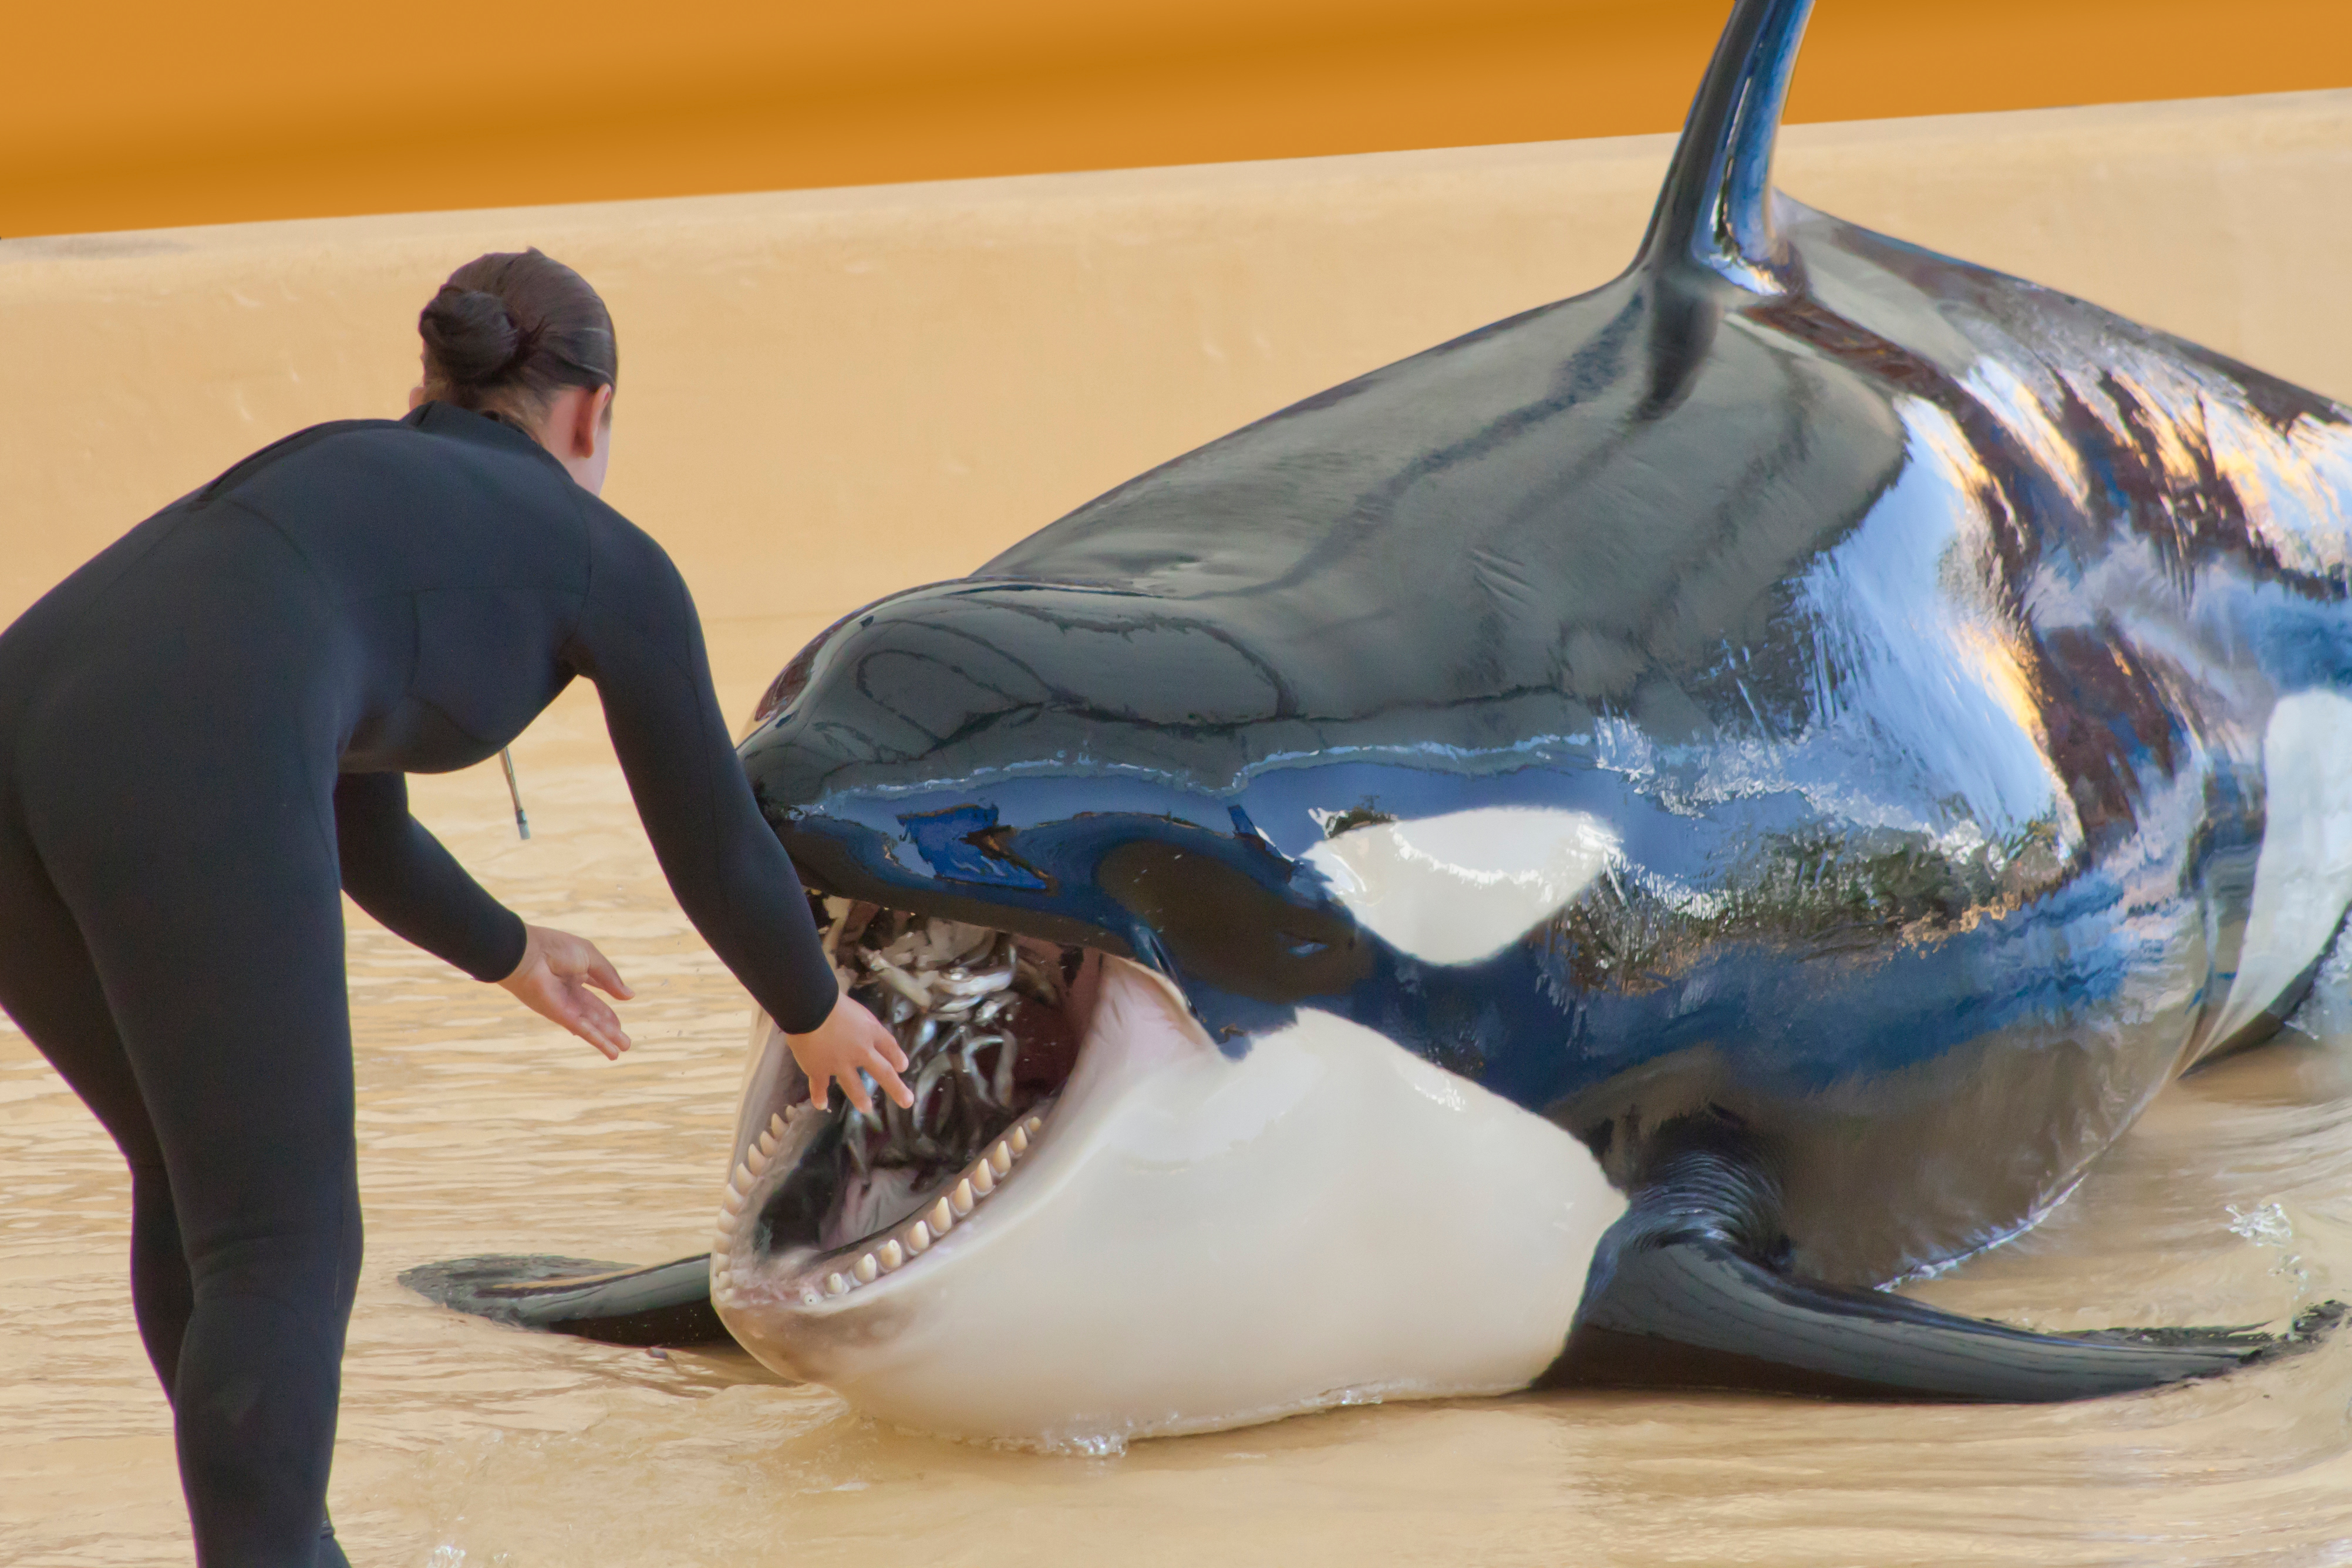 Canada is one step closer to banning whale and dolphin captivity